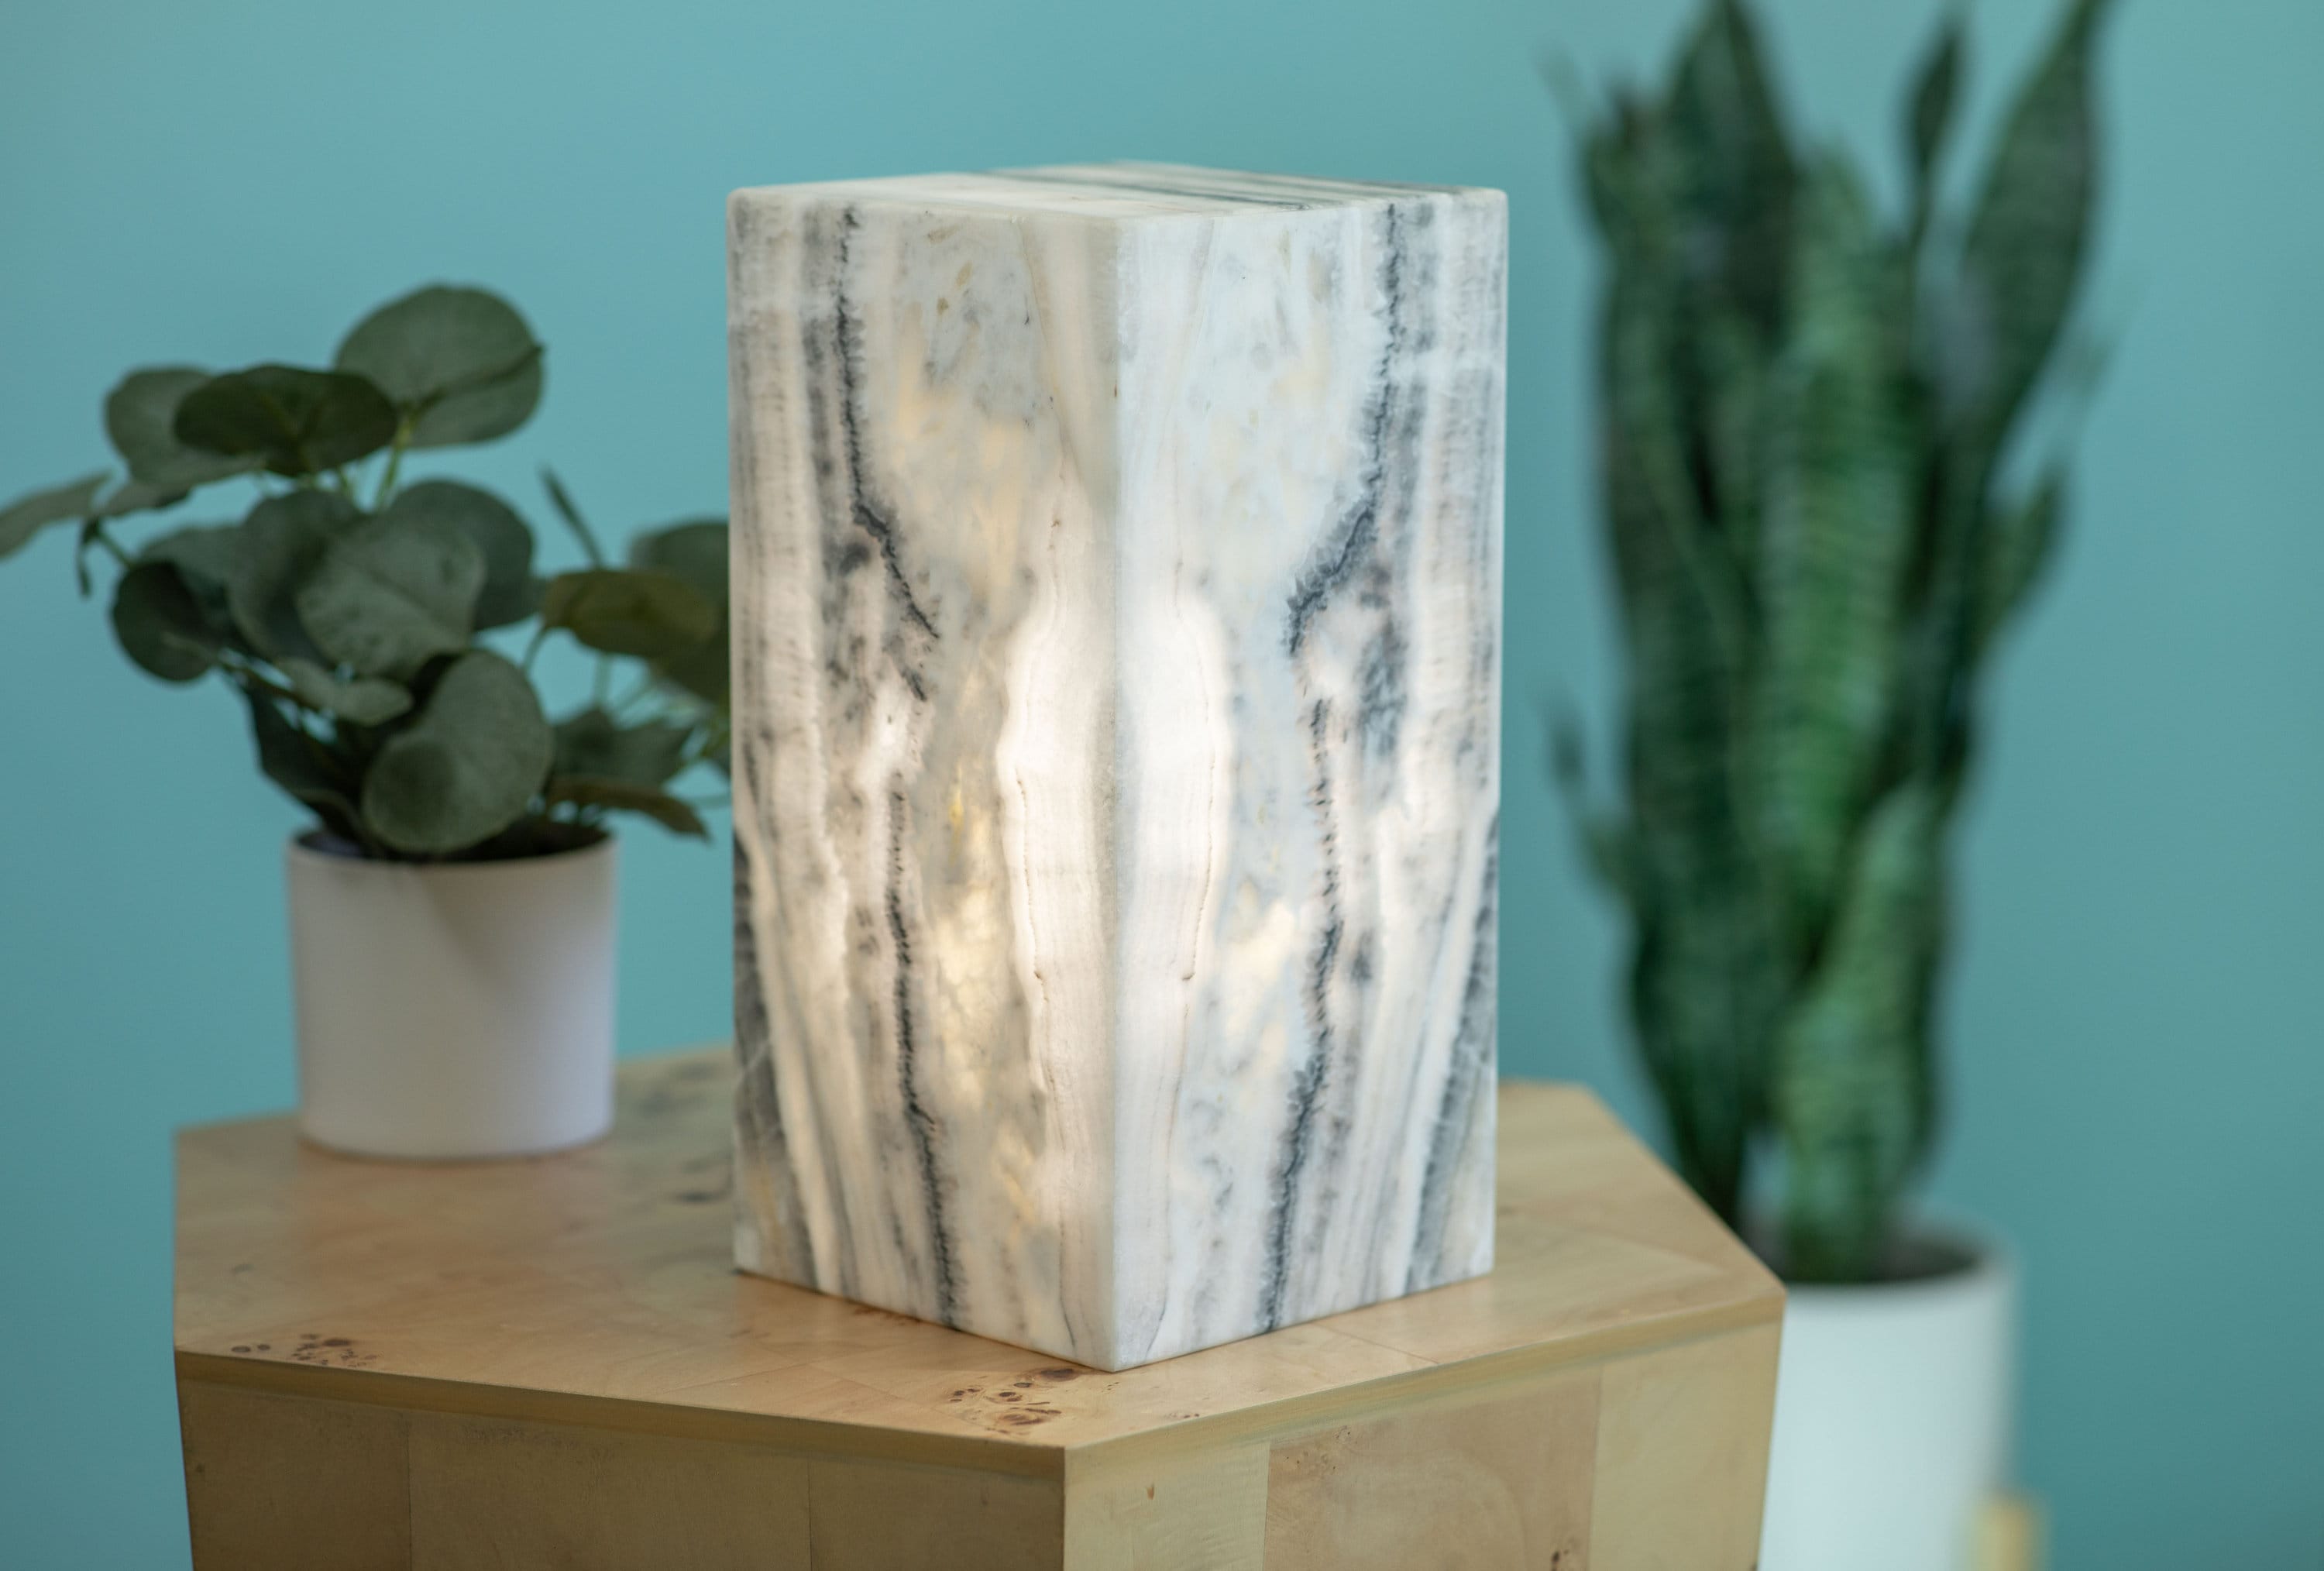 Onyx Nightstand Lamp - Handmade Table Lamp for Bedroom and Living Room Decor, Beautiful Onyx Stone Accent to Brighten Your Space